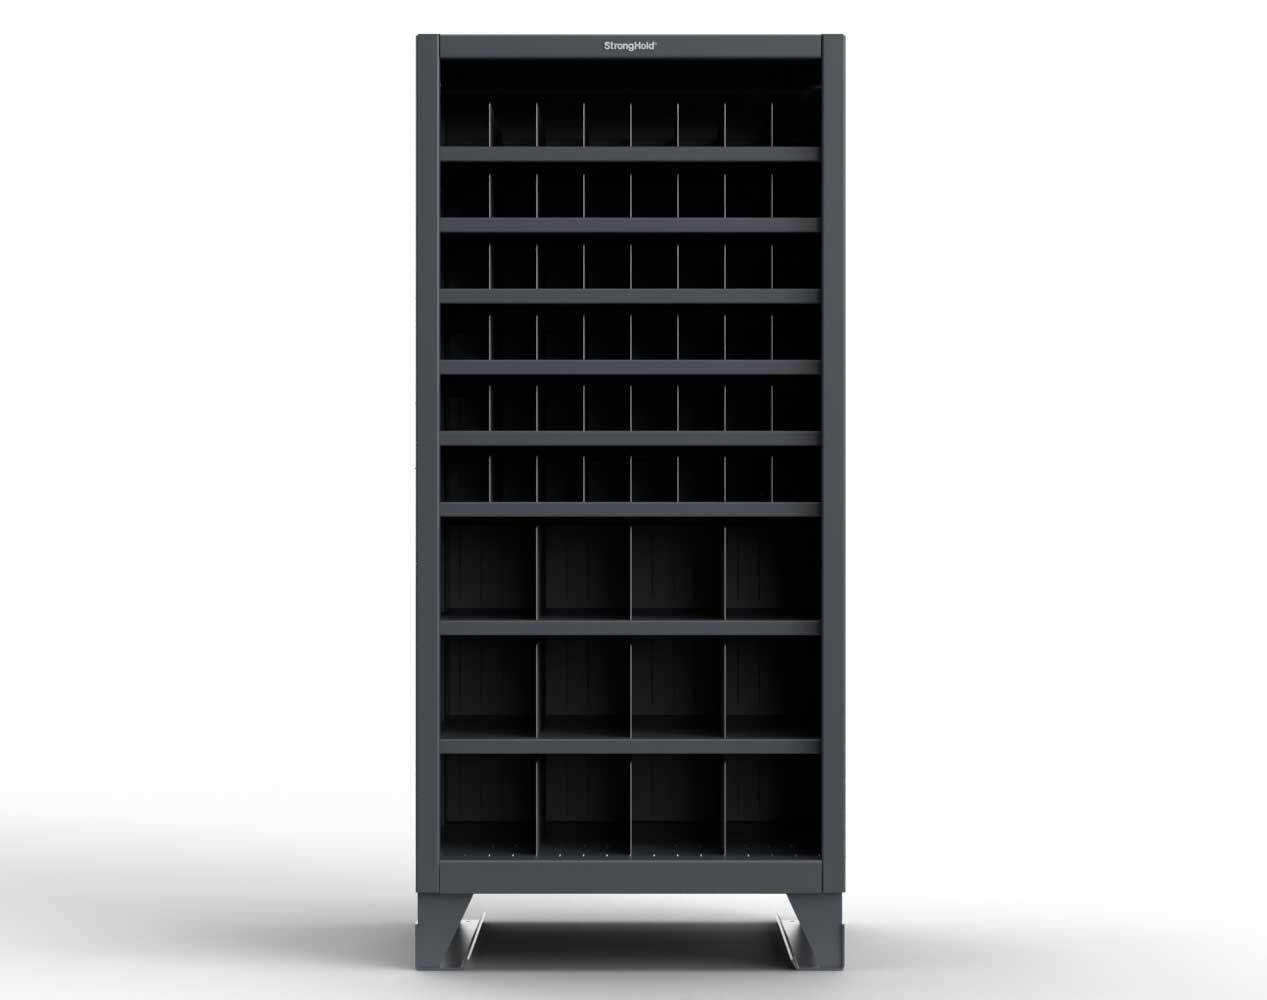 Extreme Duty 12 GA Metal Bin Storage Shelving Unit with 51 Adjustable Dividers - 36 In. W x 36 In. D x 78 In. H